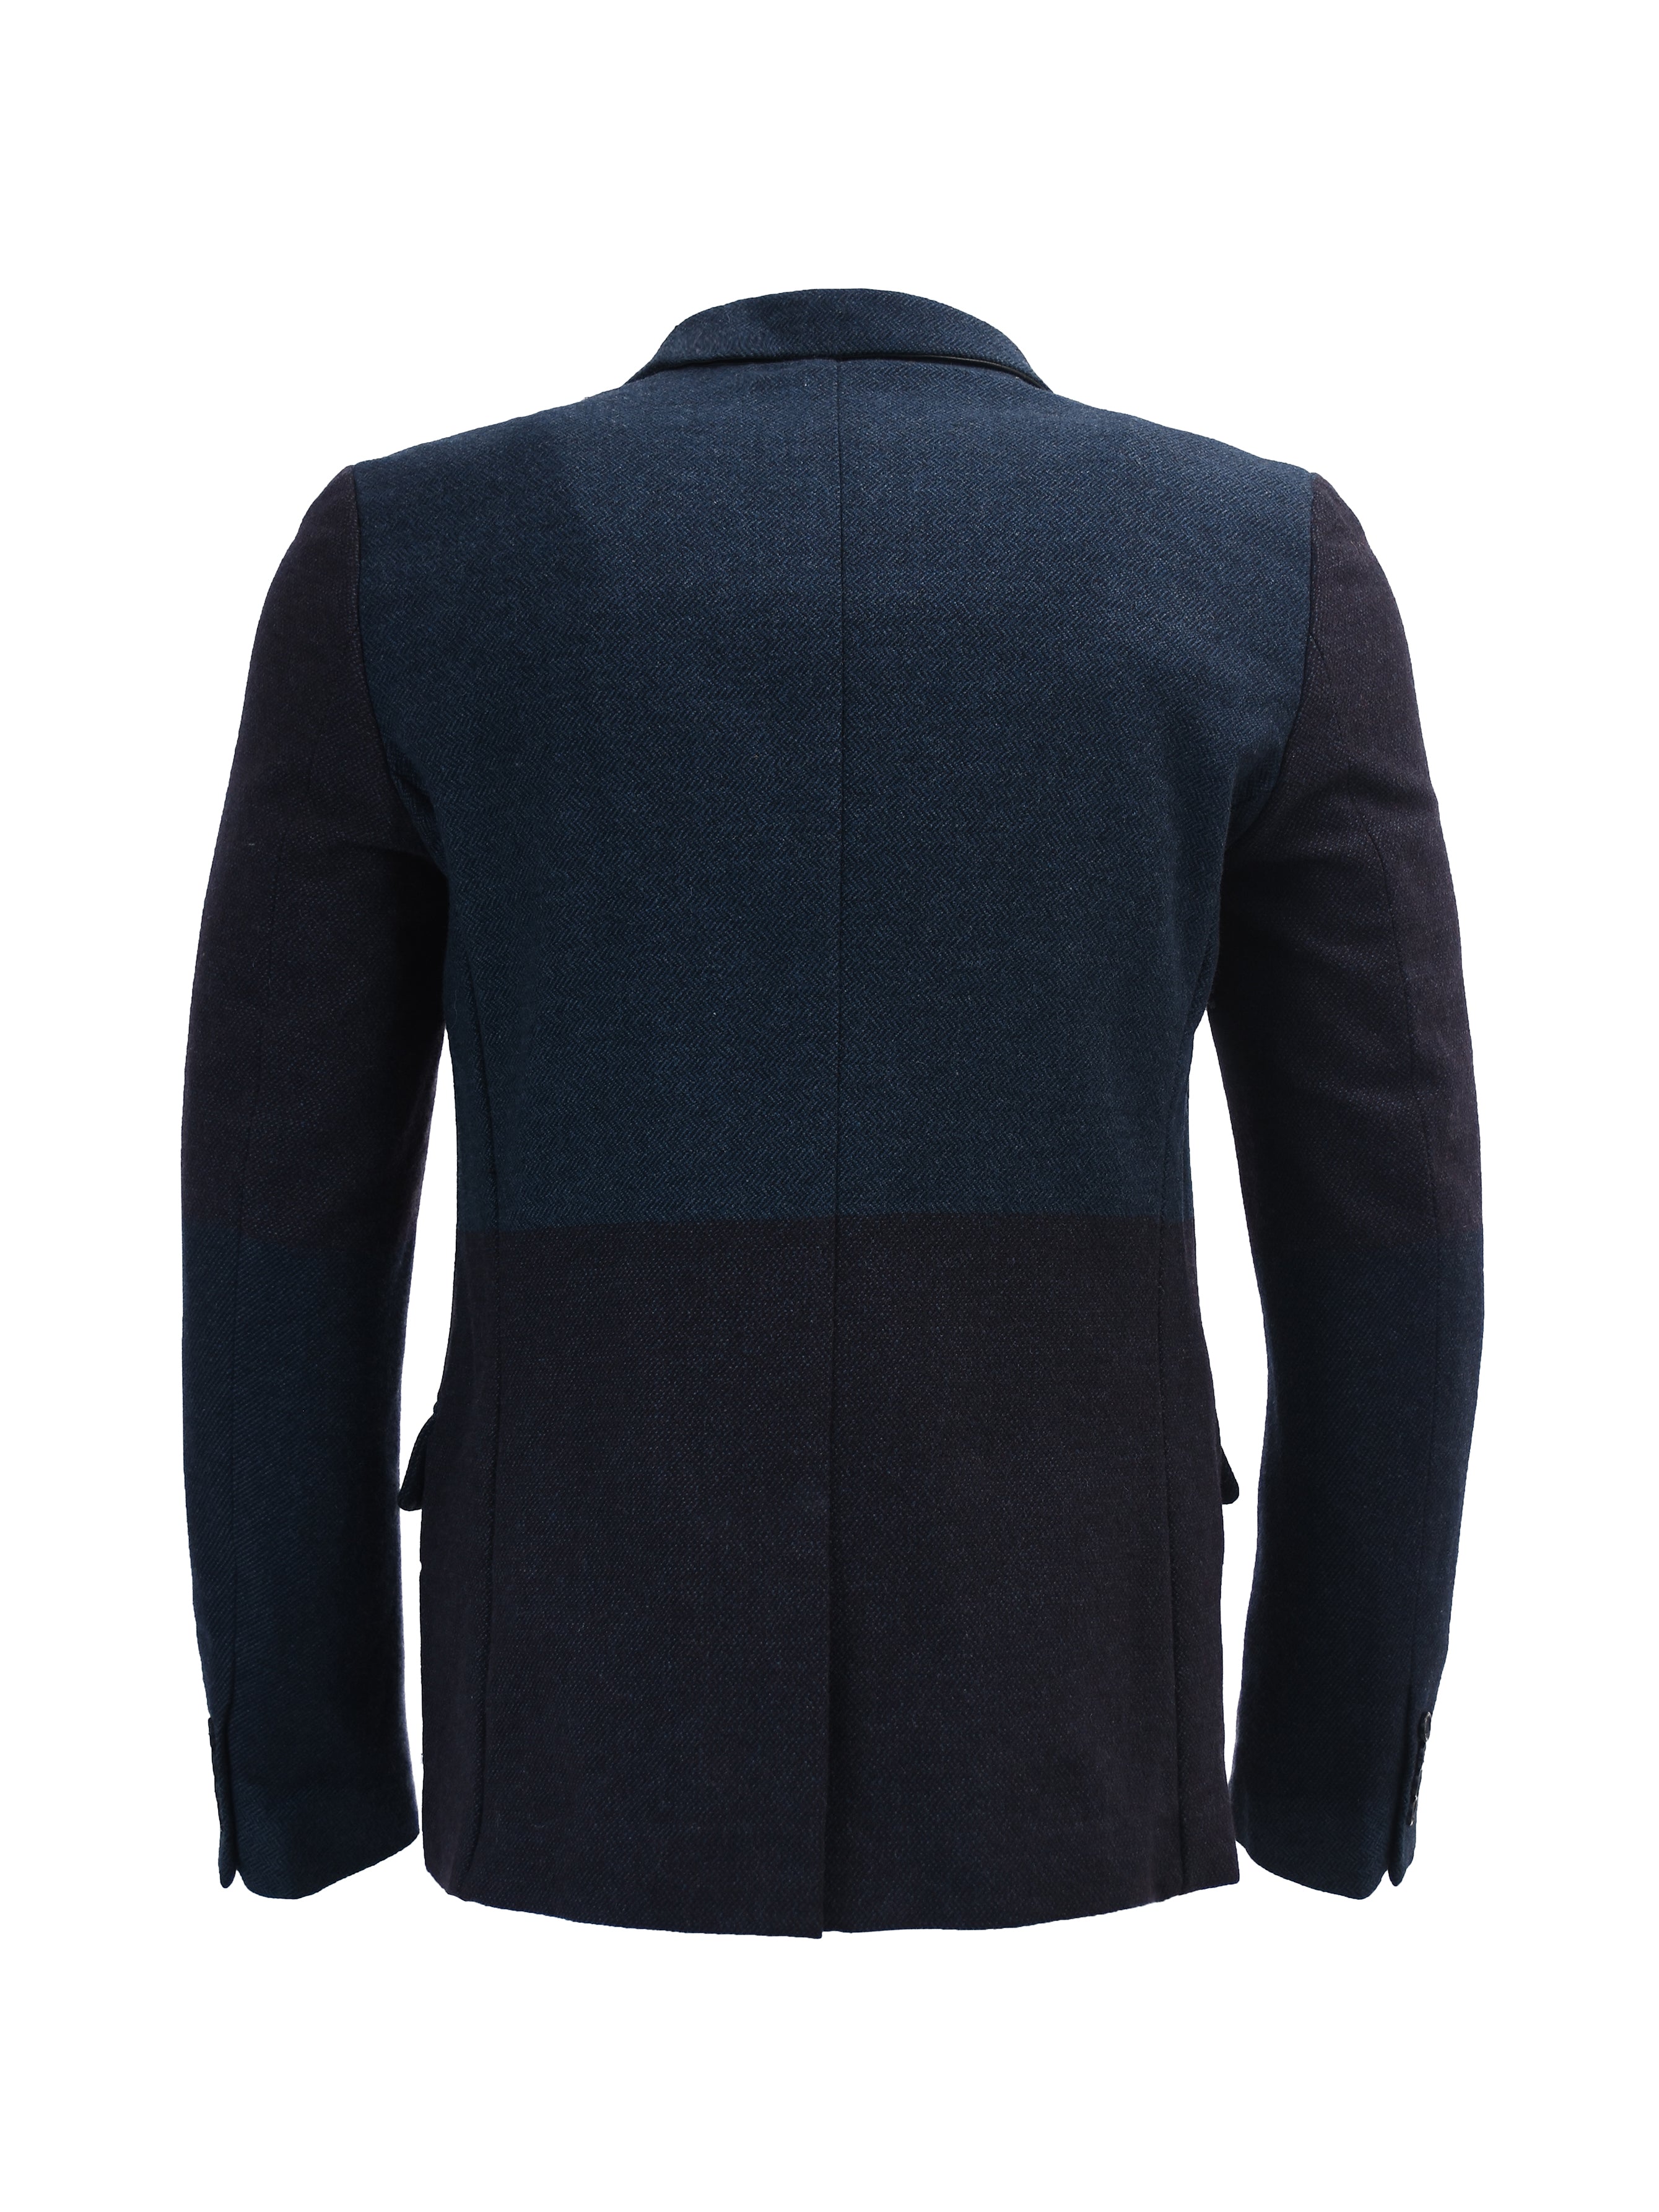 THE TUBE DARK AND NAVY TWO TONES JACKET